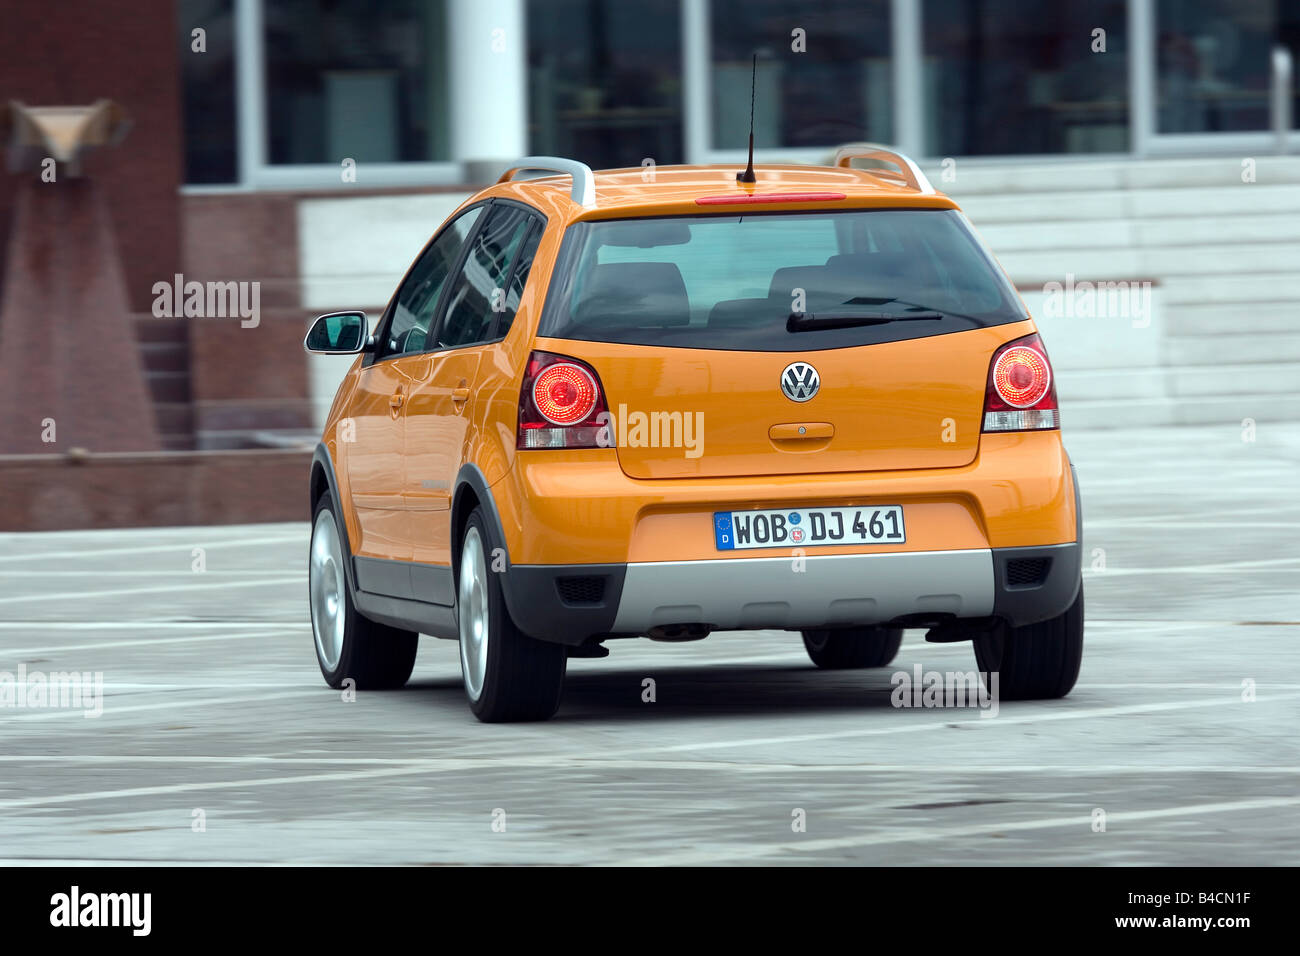 VW Volkswagen Cross Polo 1.4 TDI, model year 2006-, orange , driving,  diagonal from the back, rear view, City Stock Photo - Alamy